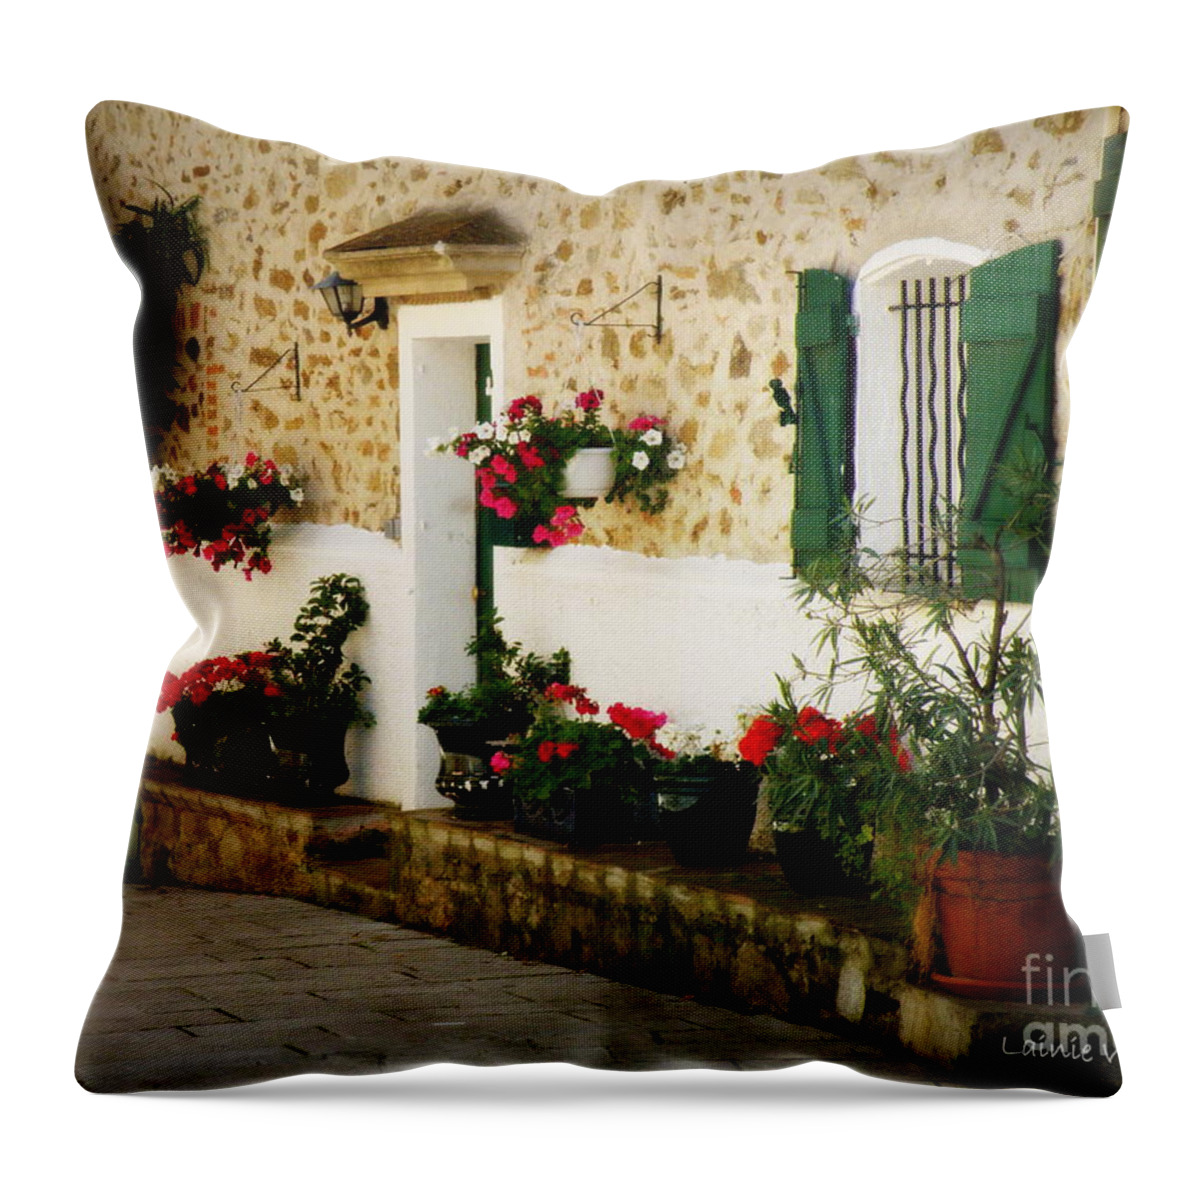 Stone House Throw Pillow featuring the photograph Garden Ledge by Lainie Wrightson